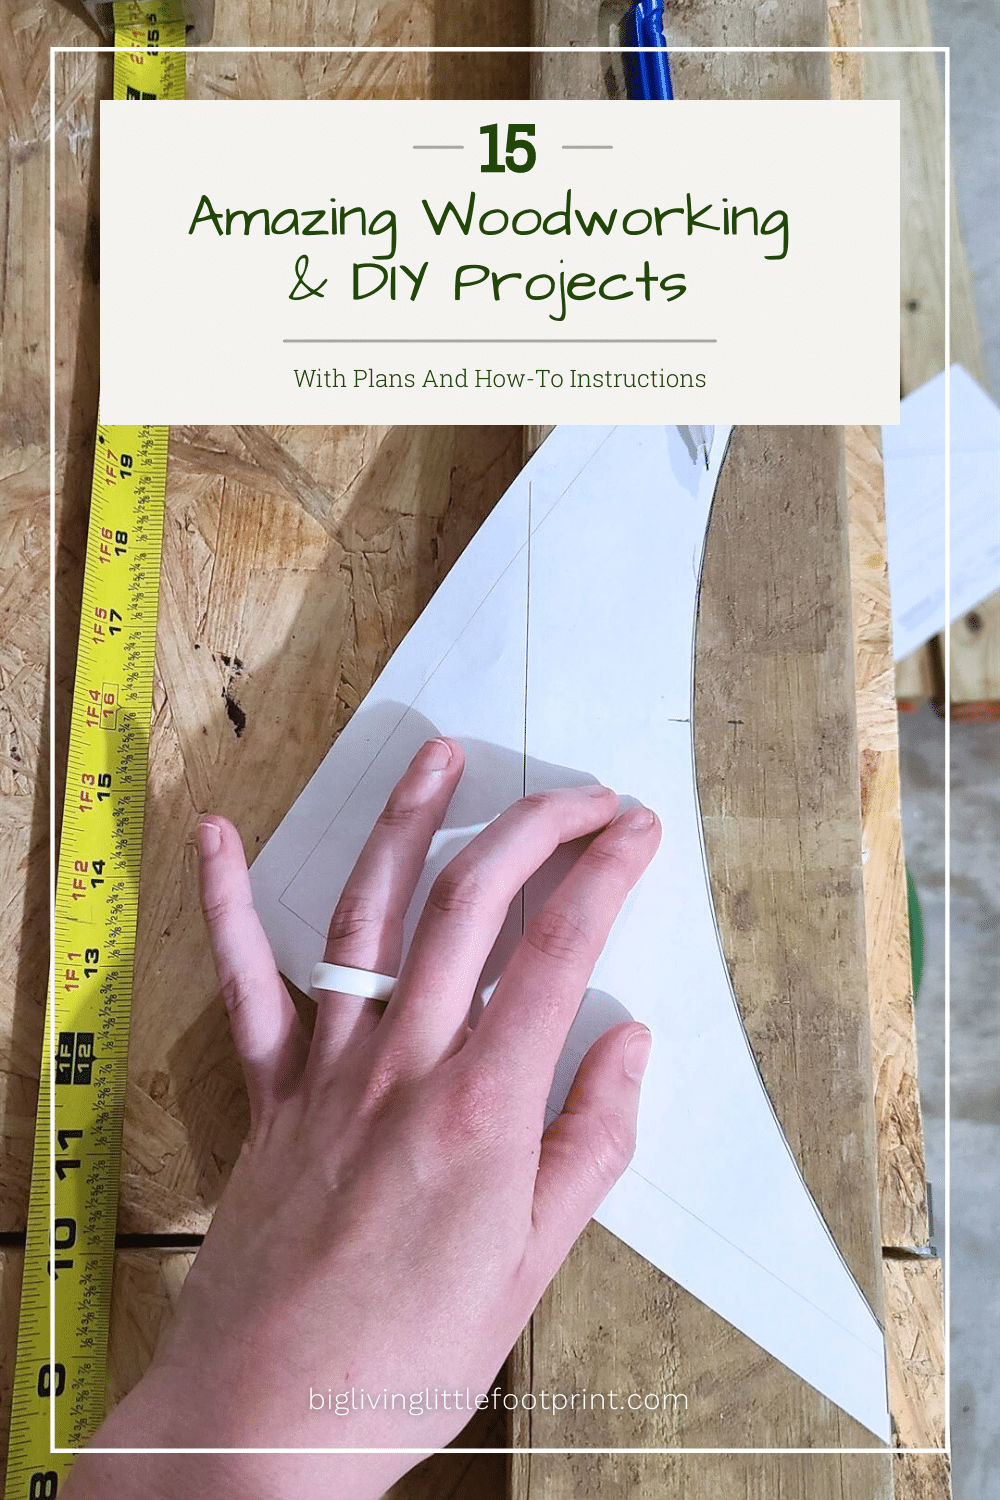 15 Amazing Woodworking & DIY Projects With Plans And How-To Instructions